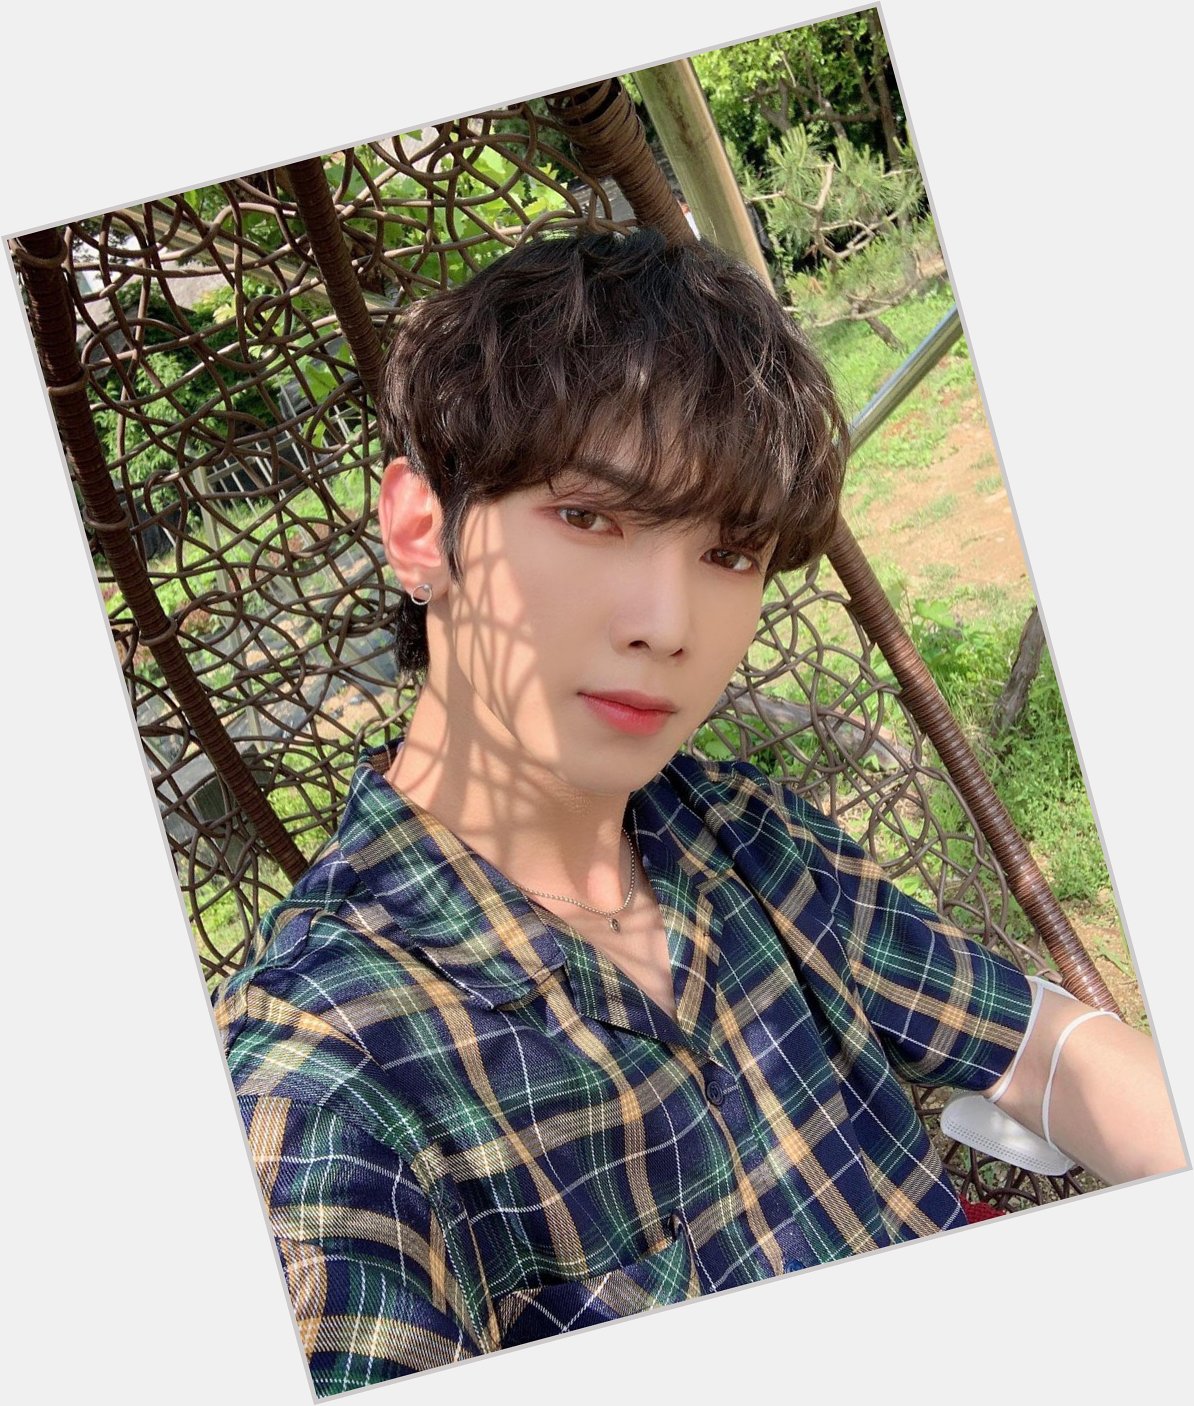 Happy birthday prince yeosang     i love youuu hope you have a great one  